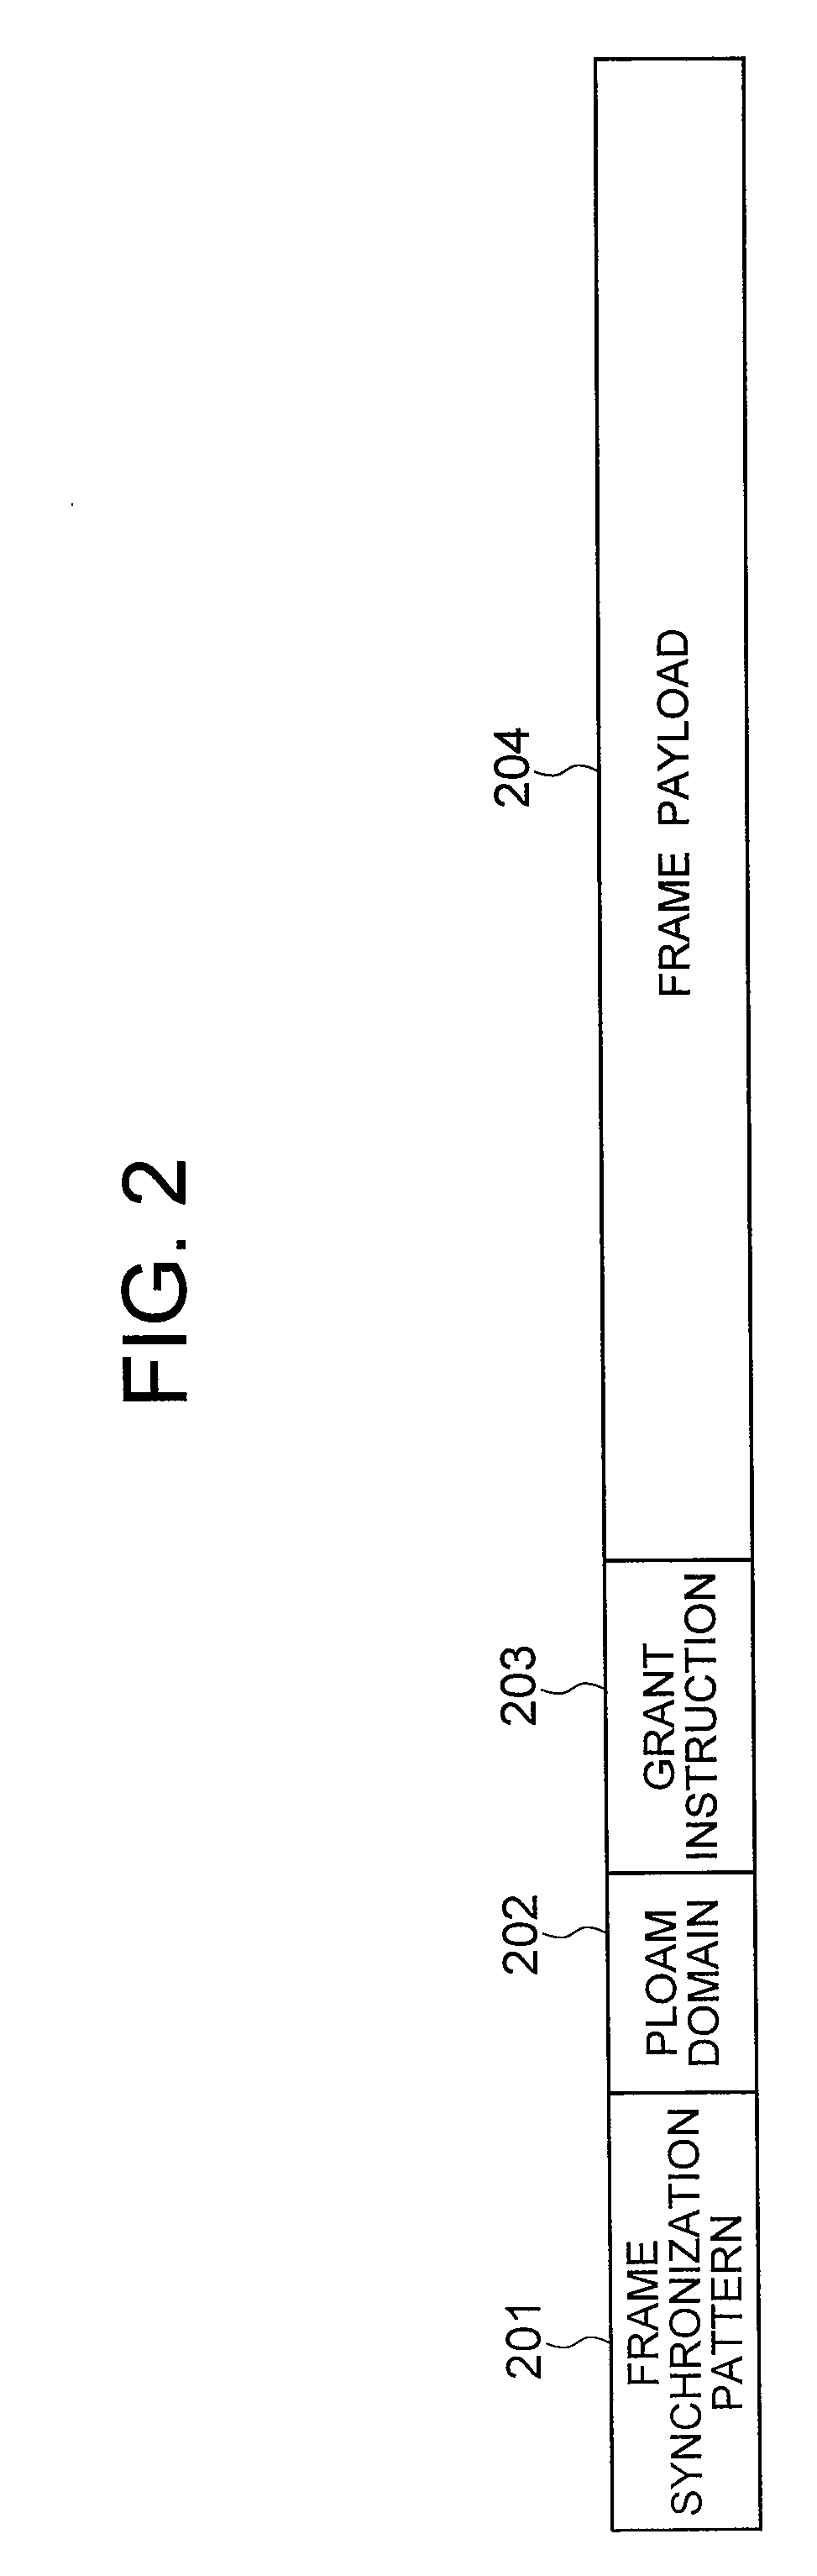 Passive optical network system and ranging system thereof